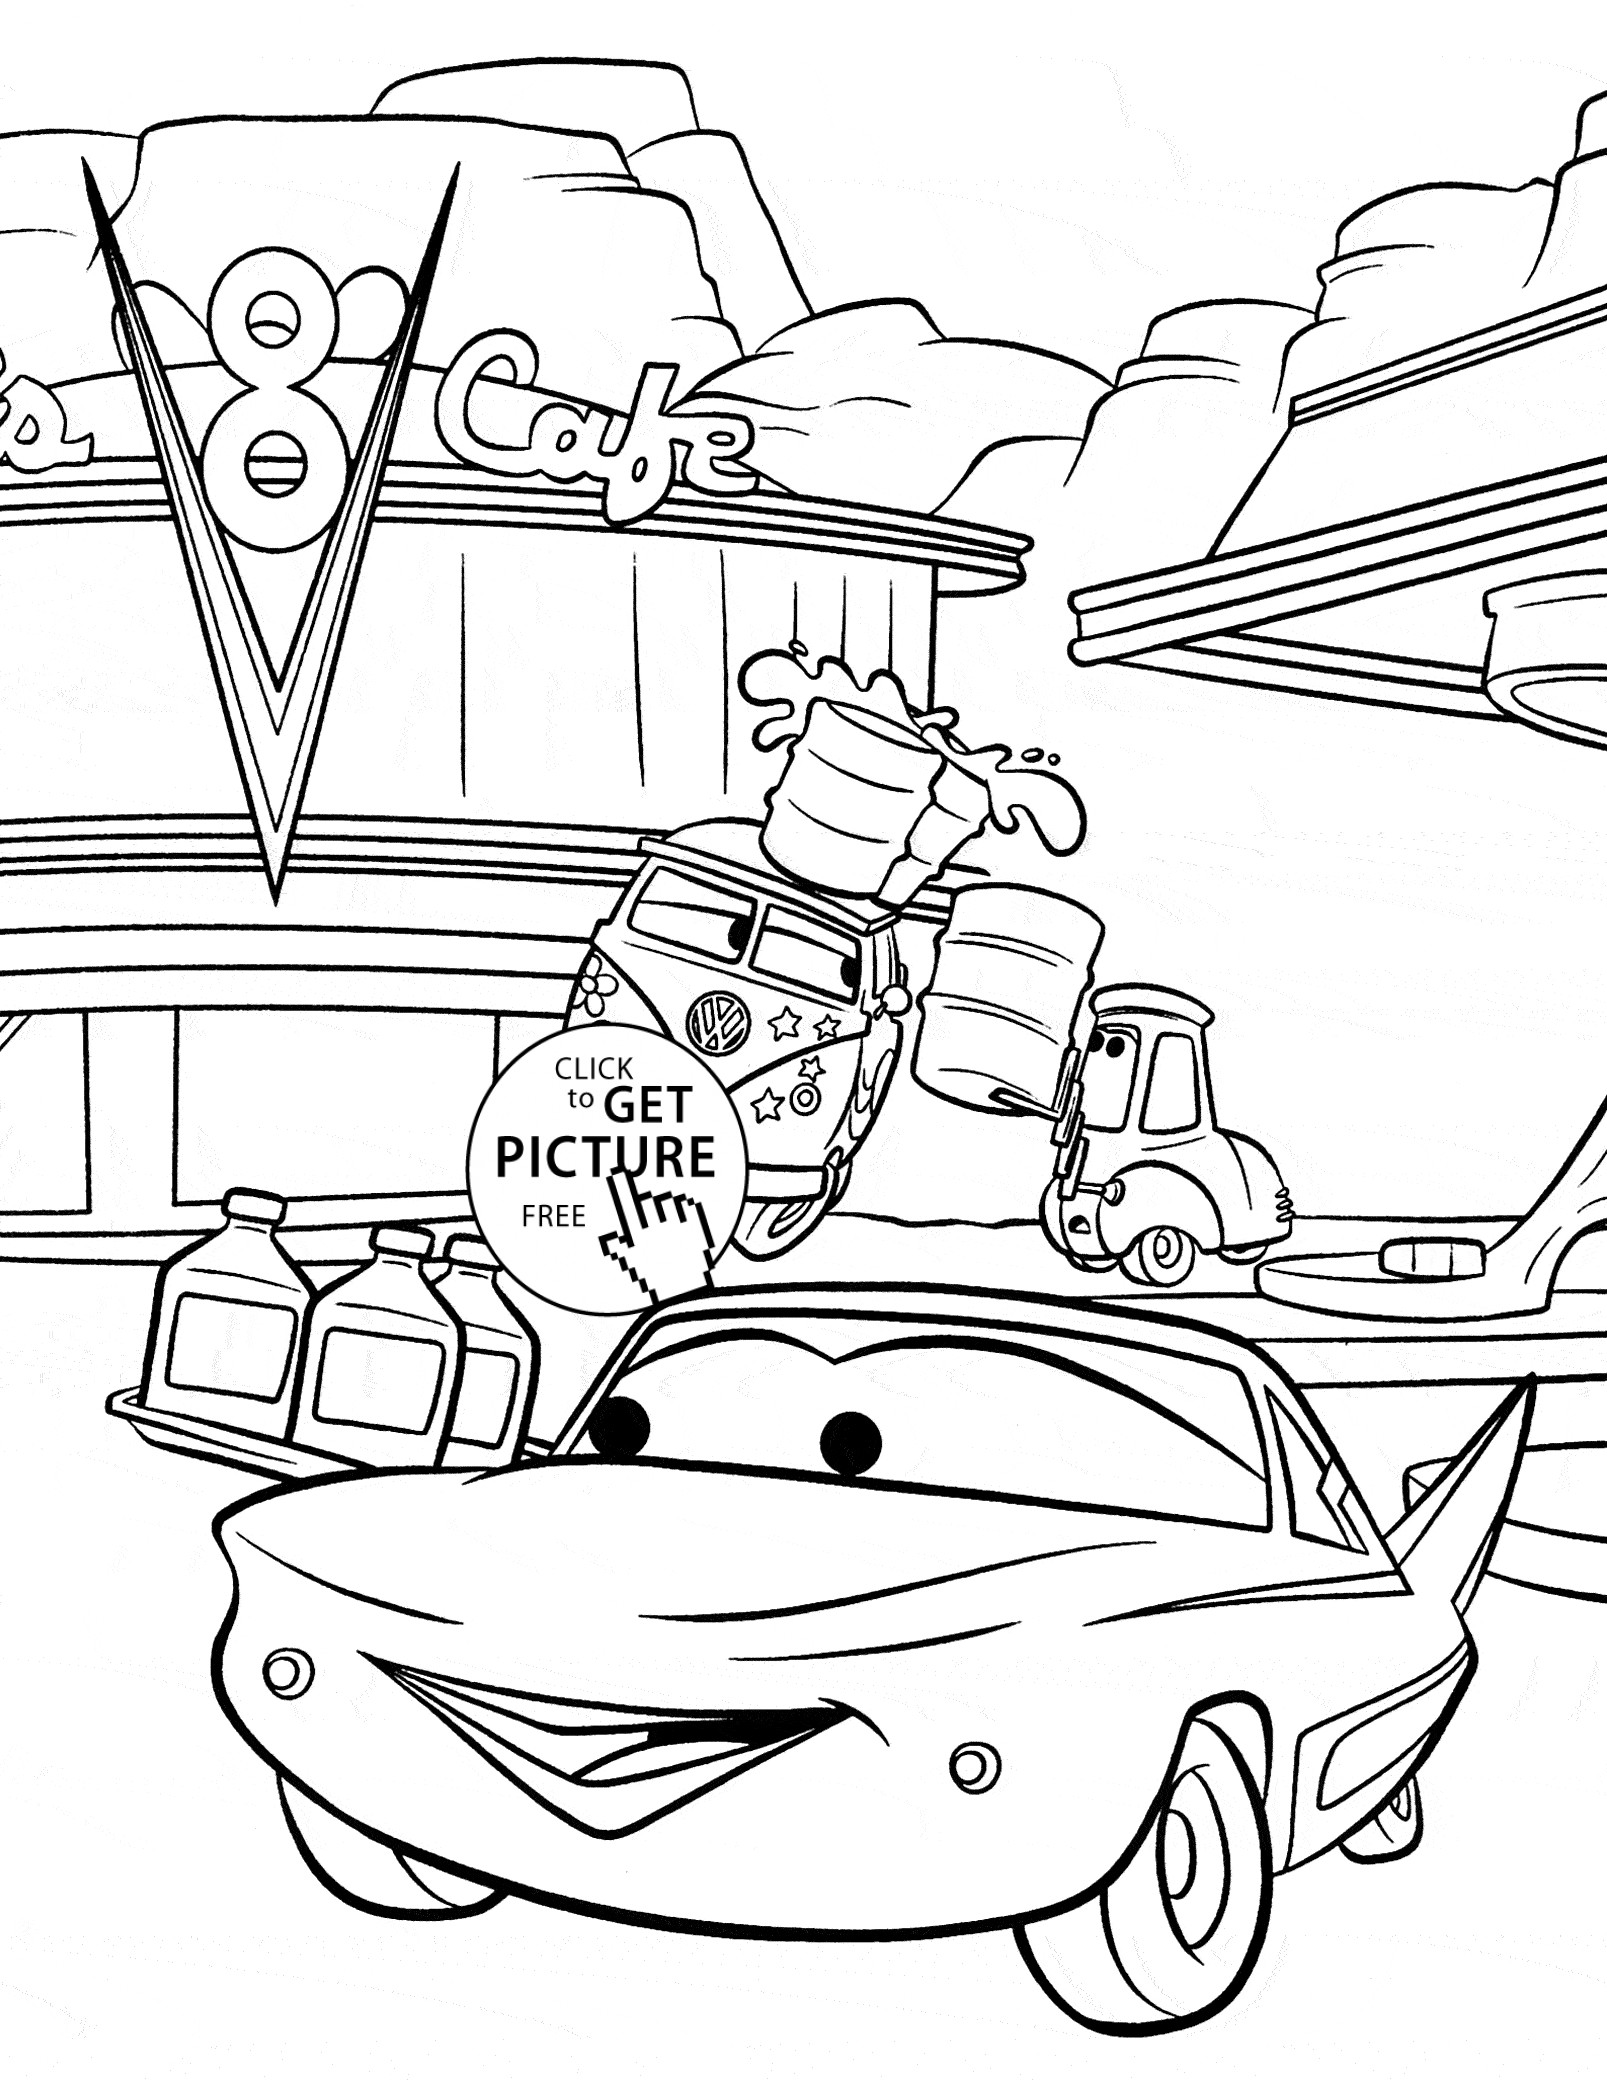 Coloring Pages Of Cars For Boys
 Cars cafe 8 coloring page for kids disney coloring pages